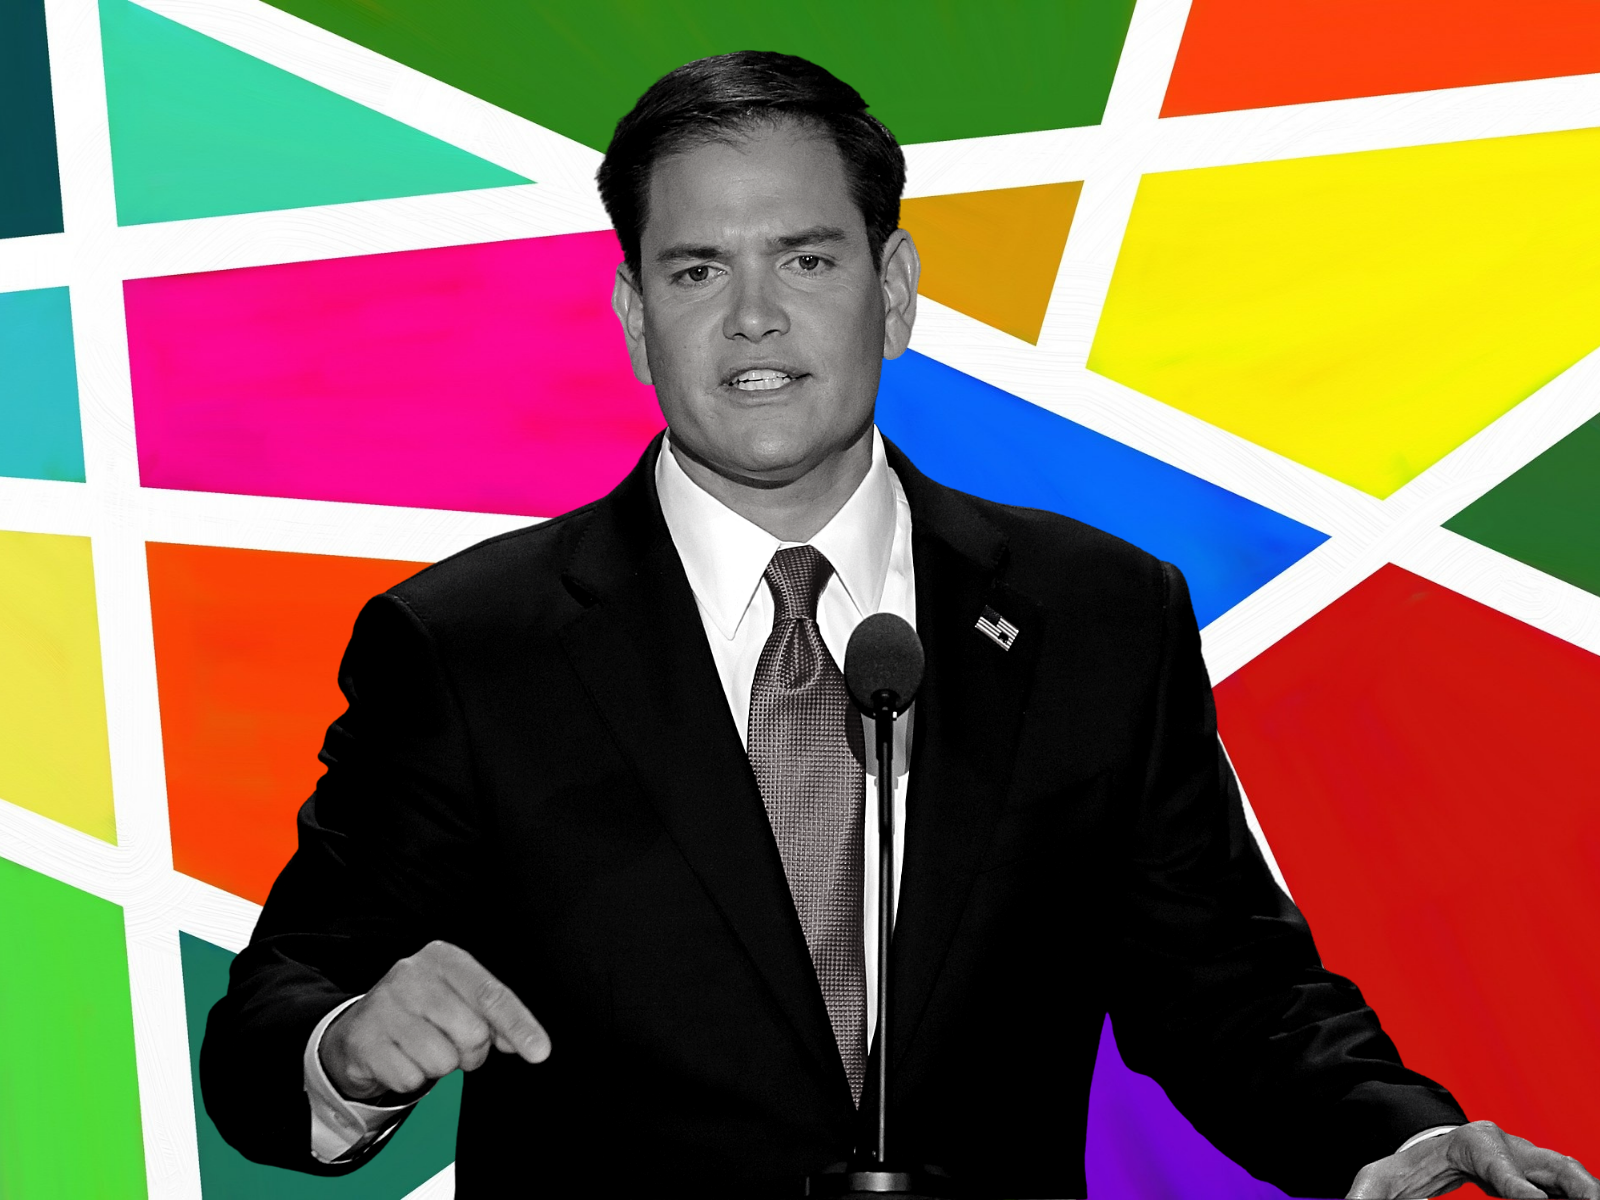 Marco Rubio throws block for controversial NFL player's trad Catholic comments